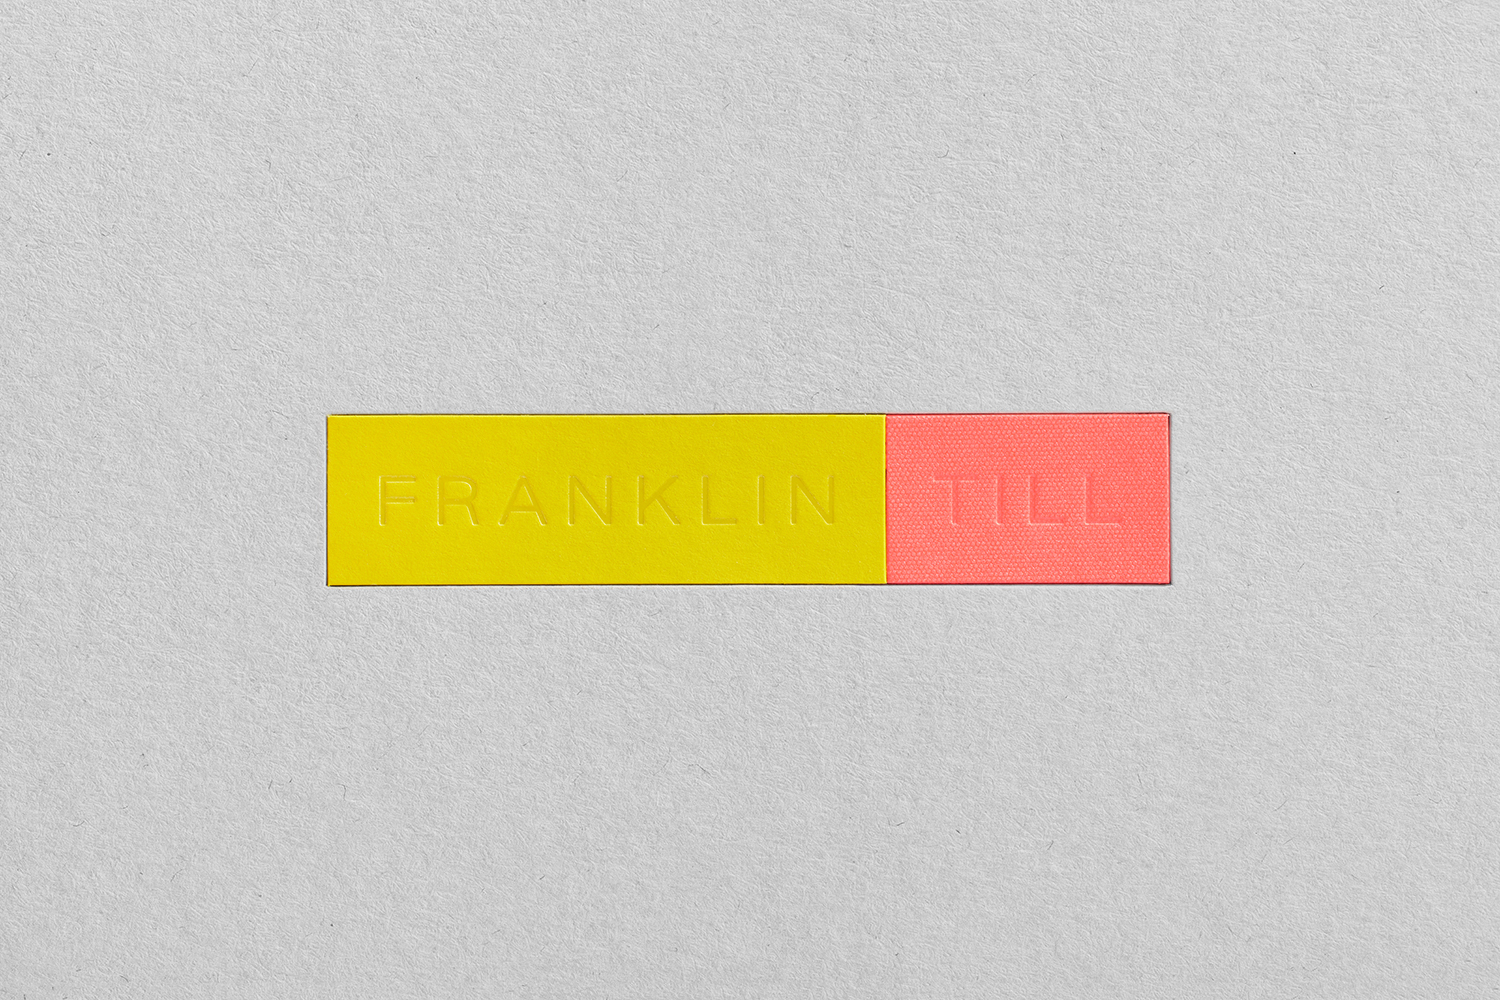 Creative Logotype Gallery & Inspiration: FranklinTill by Commission